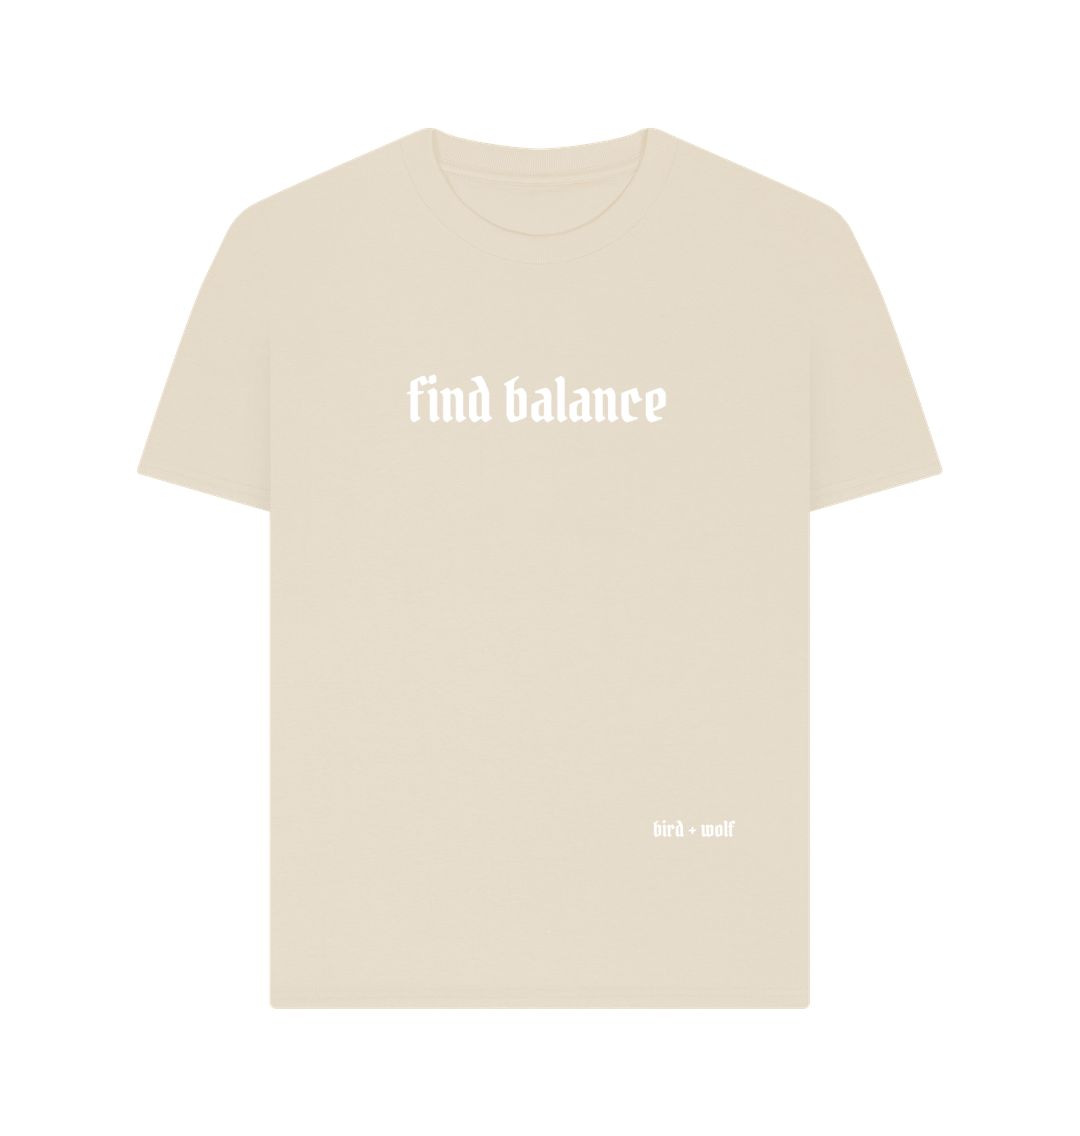 Oat Find Balance Relaxed Tee (White Lettering)